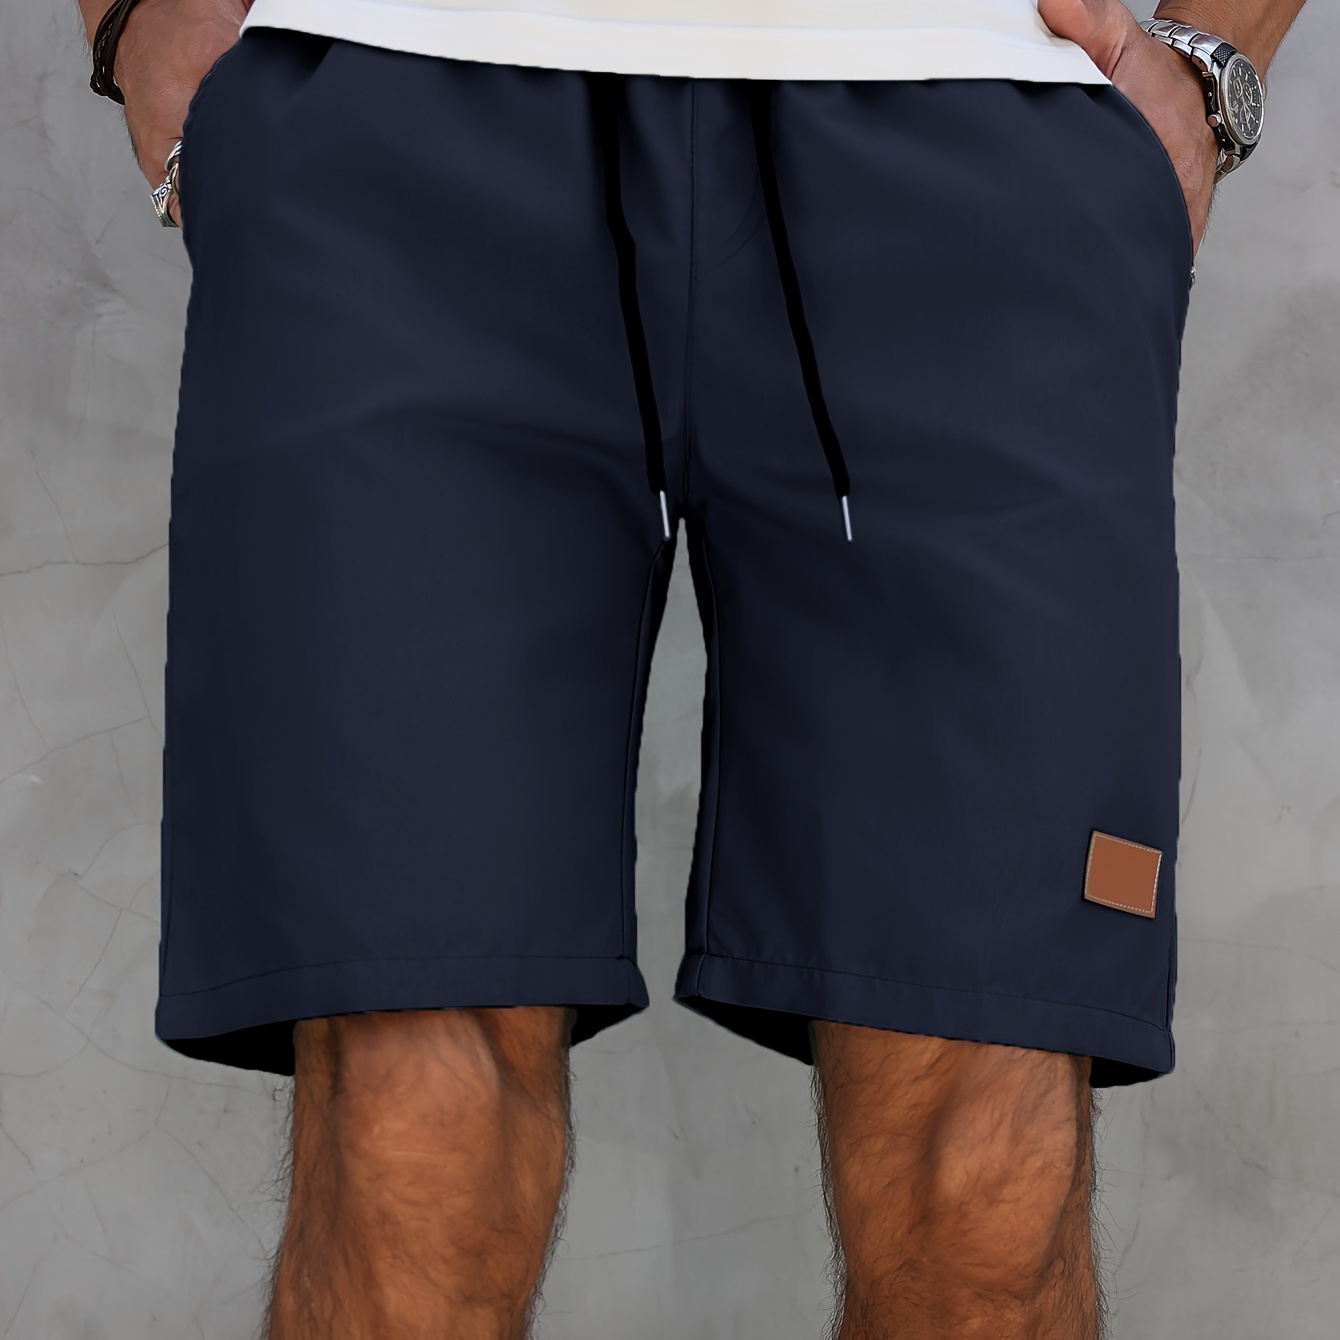 

Shorts for men in solid colors, with a casual style and an elastic waistband with a drawstring, perfect for a comfortable and stylish summer look.